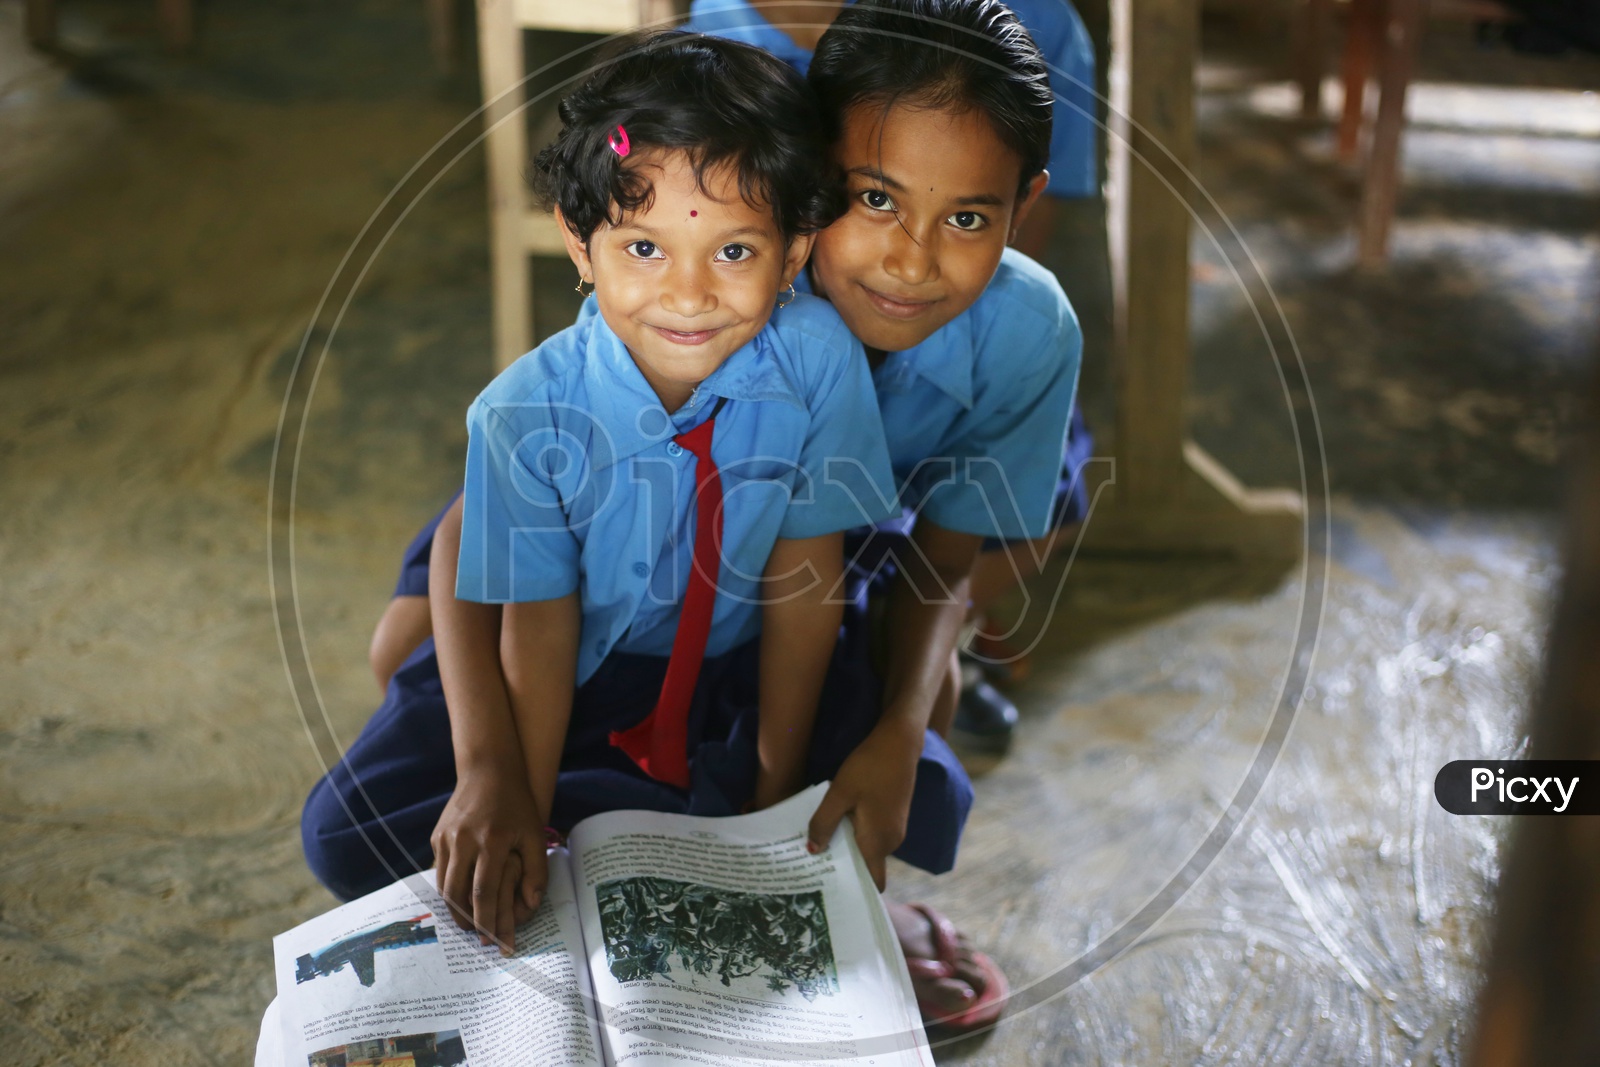 School Children Or School Students Wearing Uniforms In a Classrooms With Books